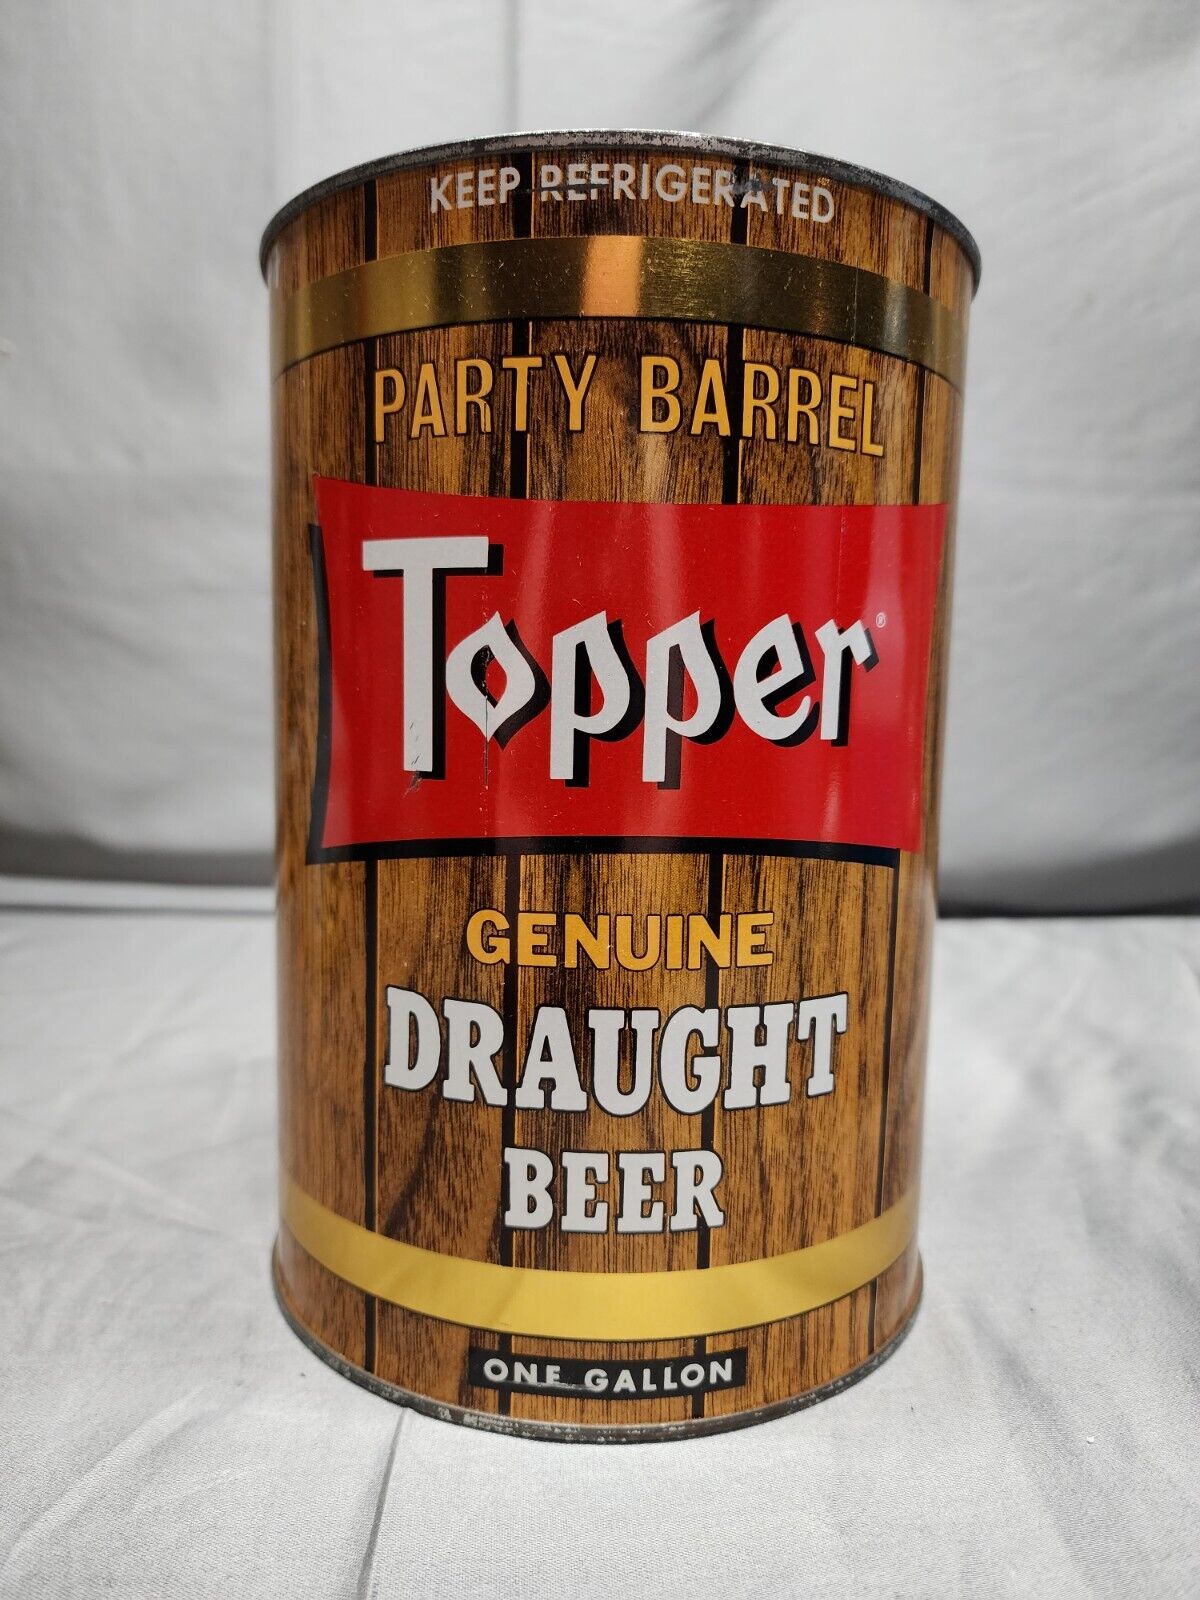 Vintage Topper Genuine Draught Beer Party Barrel Gallon Can